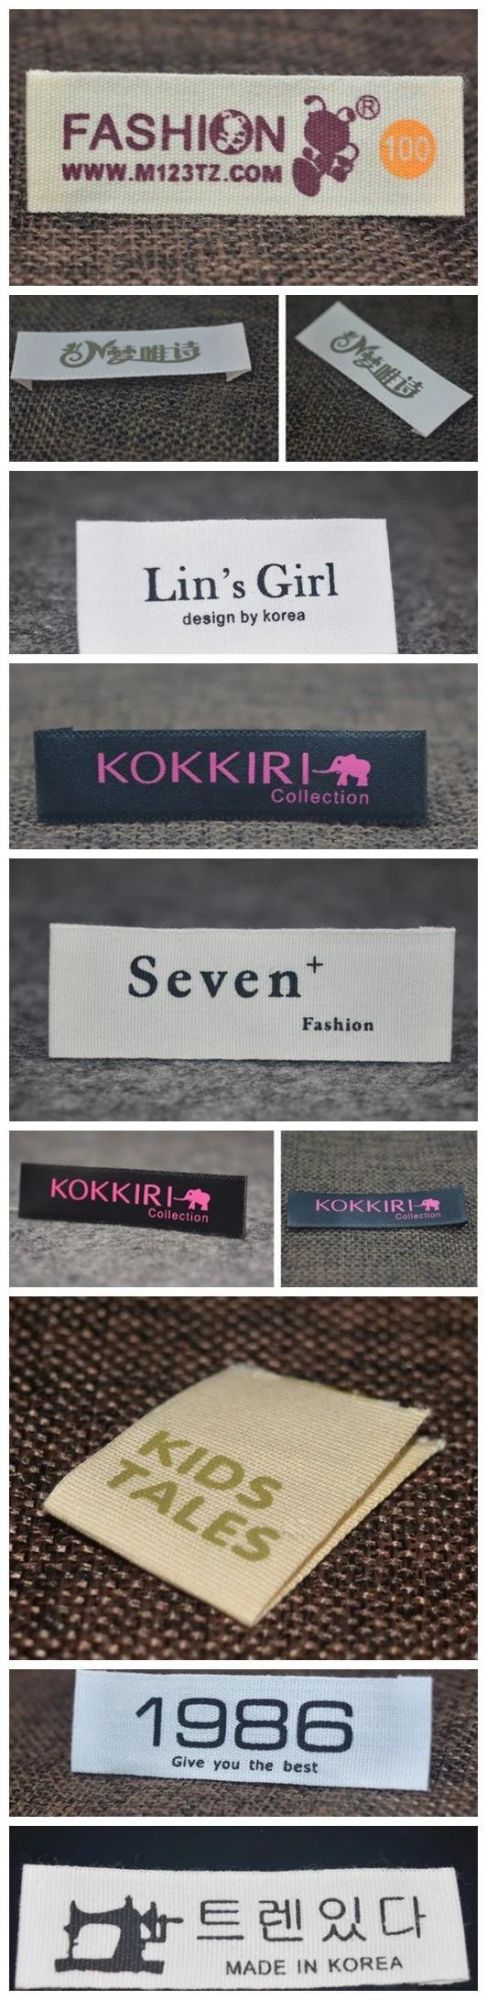 Label Clothing Woven Label for Garment